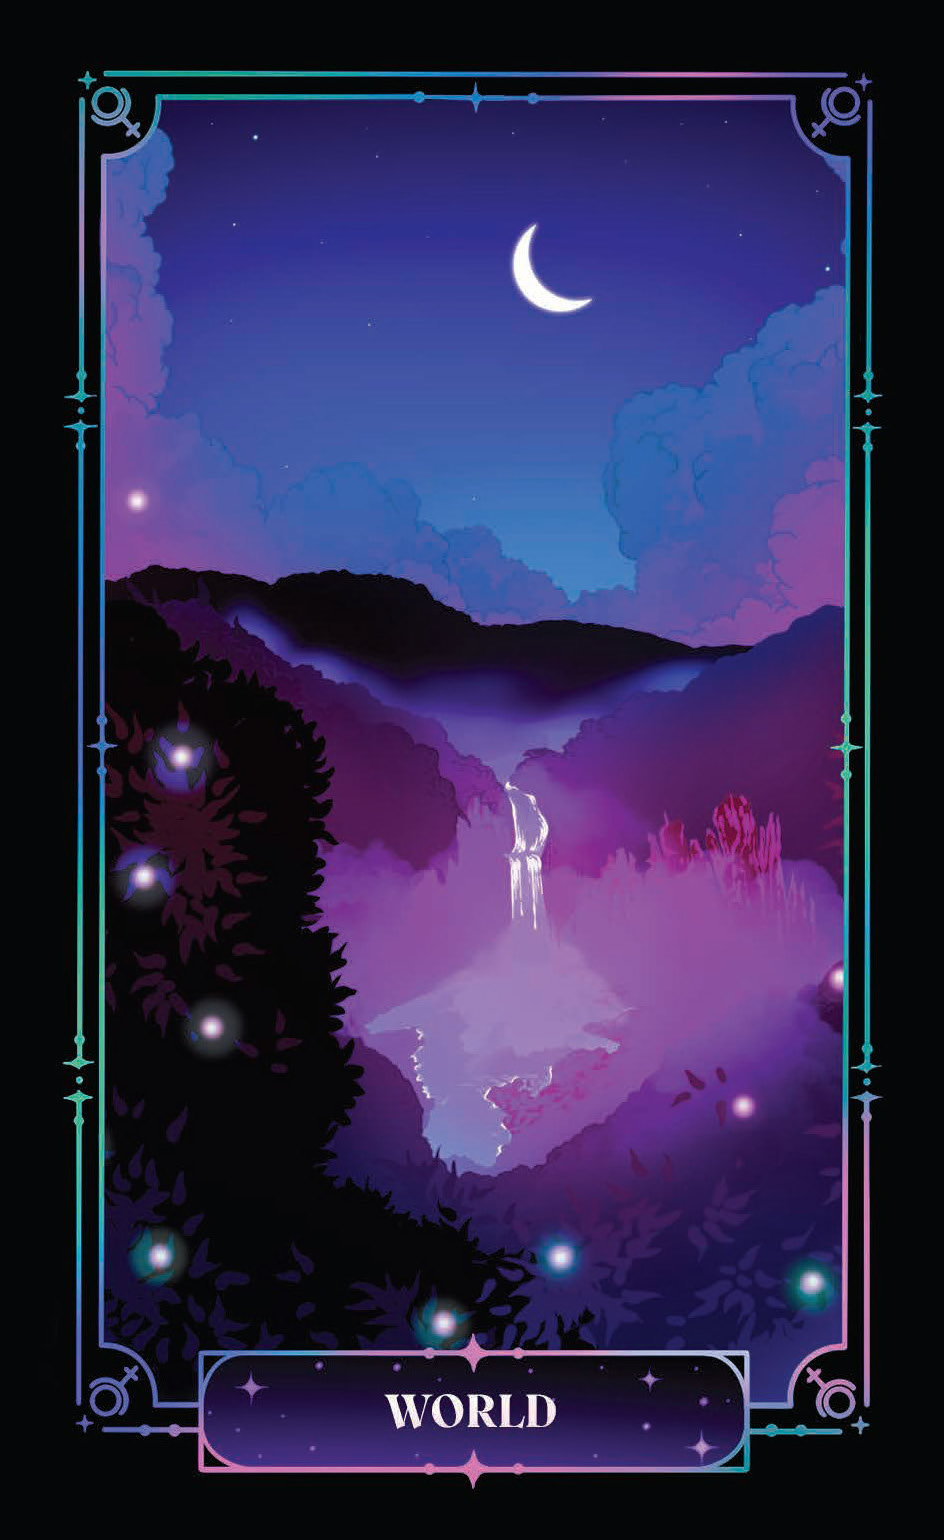 Image of the World card from the Oracle of Pluto deck